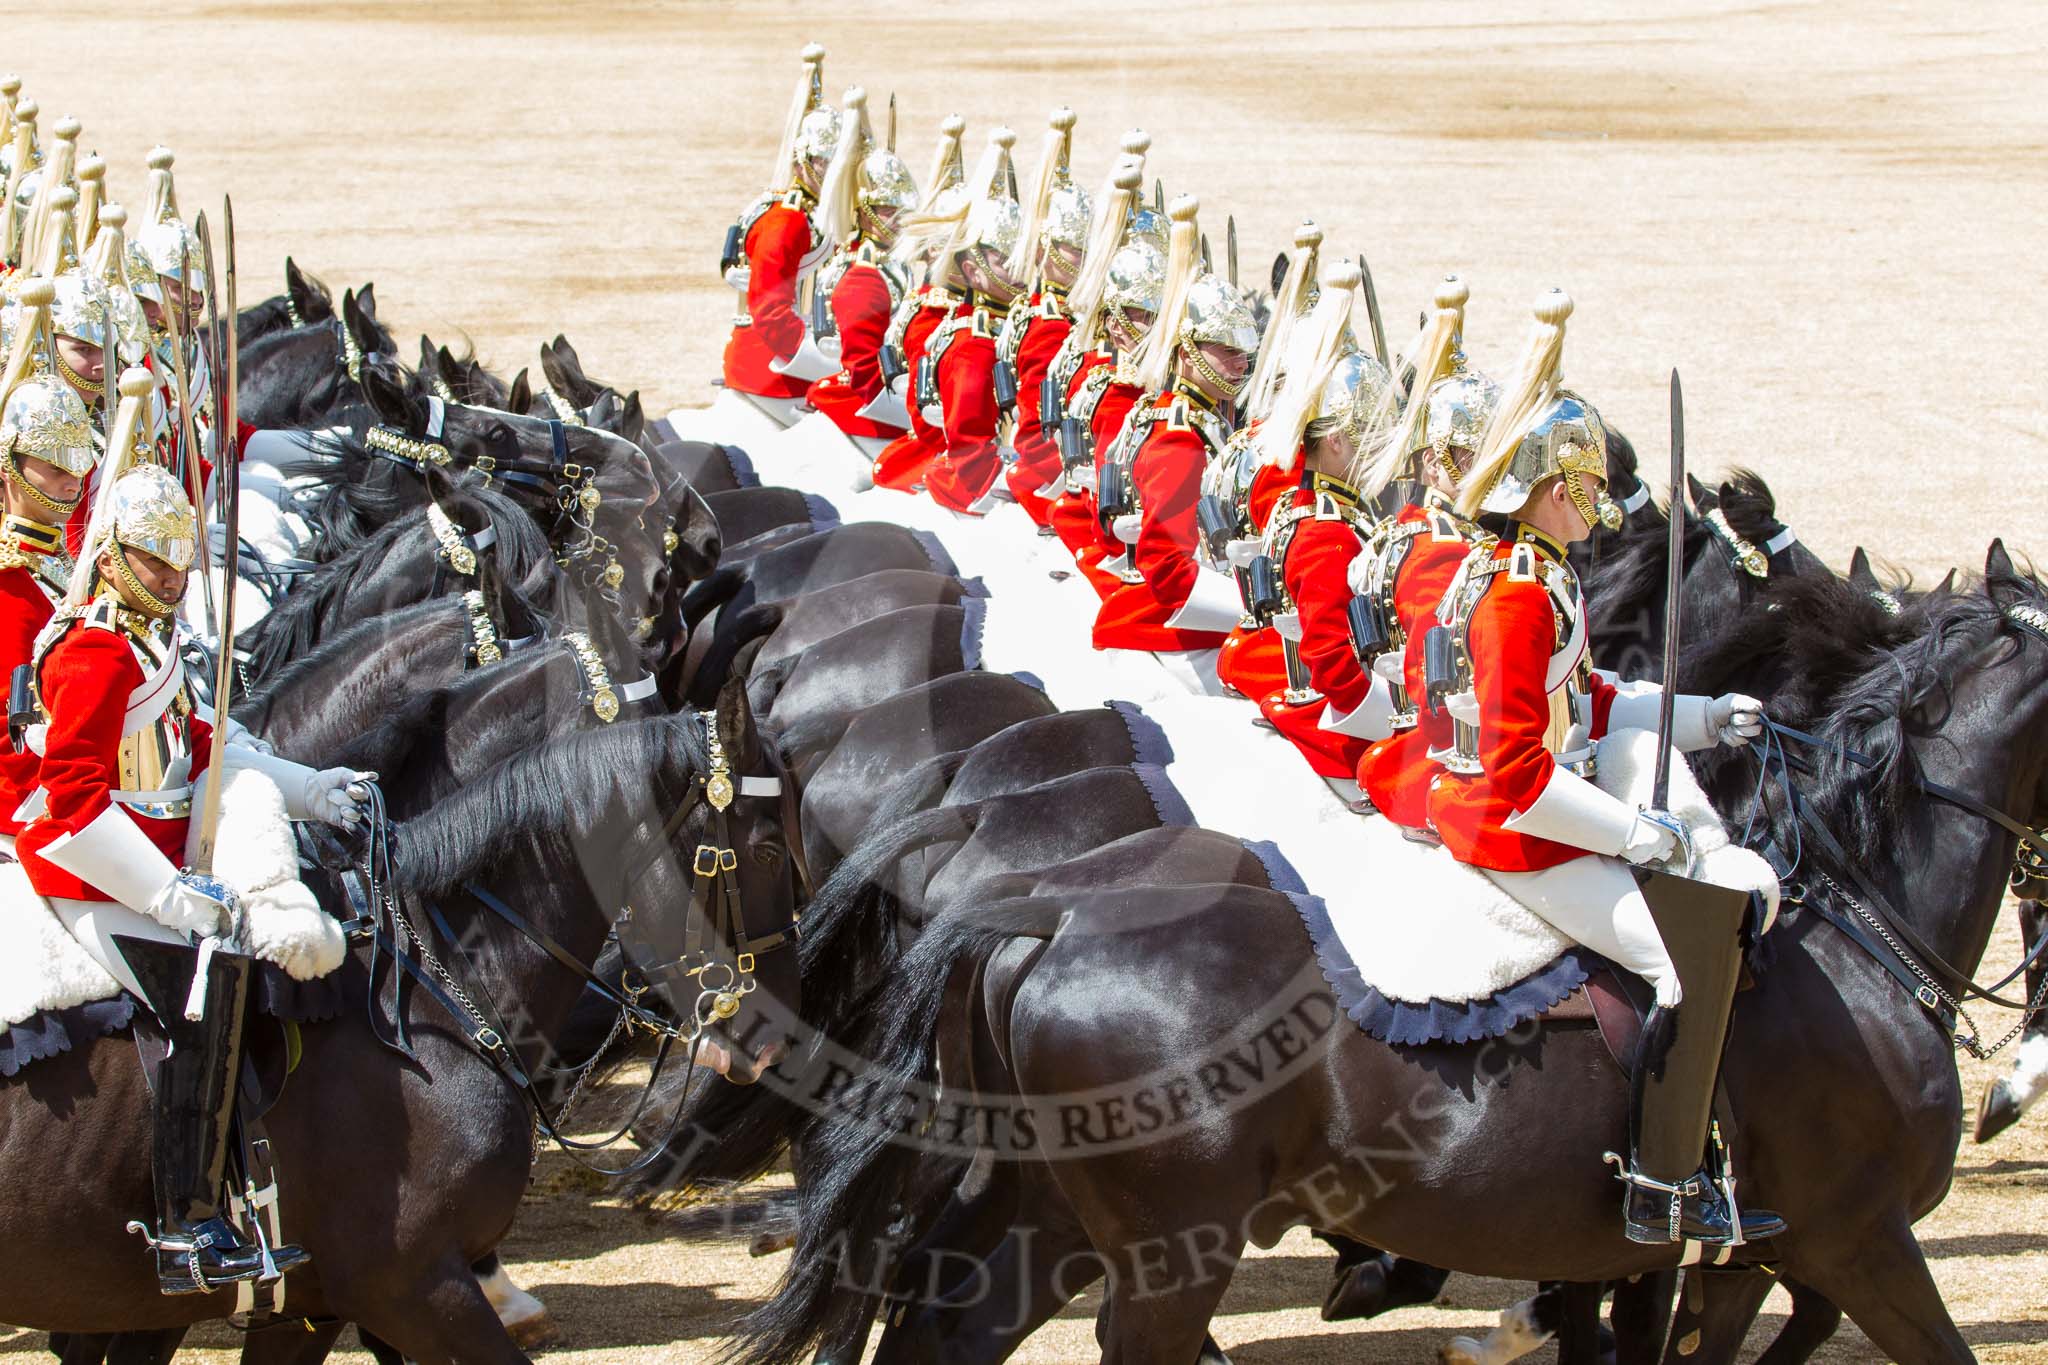 Trooping the Colour 2013: The First and Second Divisions of the Sovereign's Escort, The Life Guards, during the Ride Past. Image #693, 15 June 2013 11:55 Horse Guards Parade, London, UK